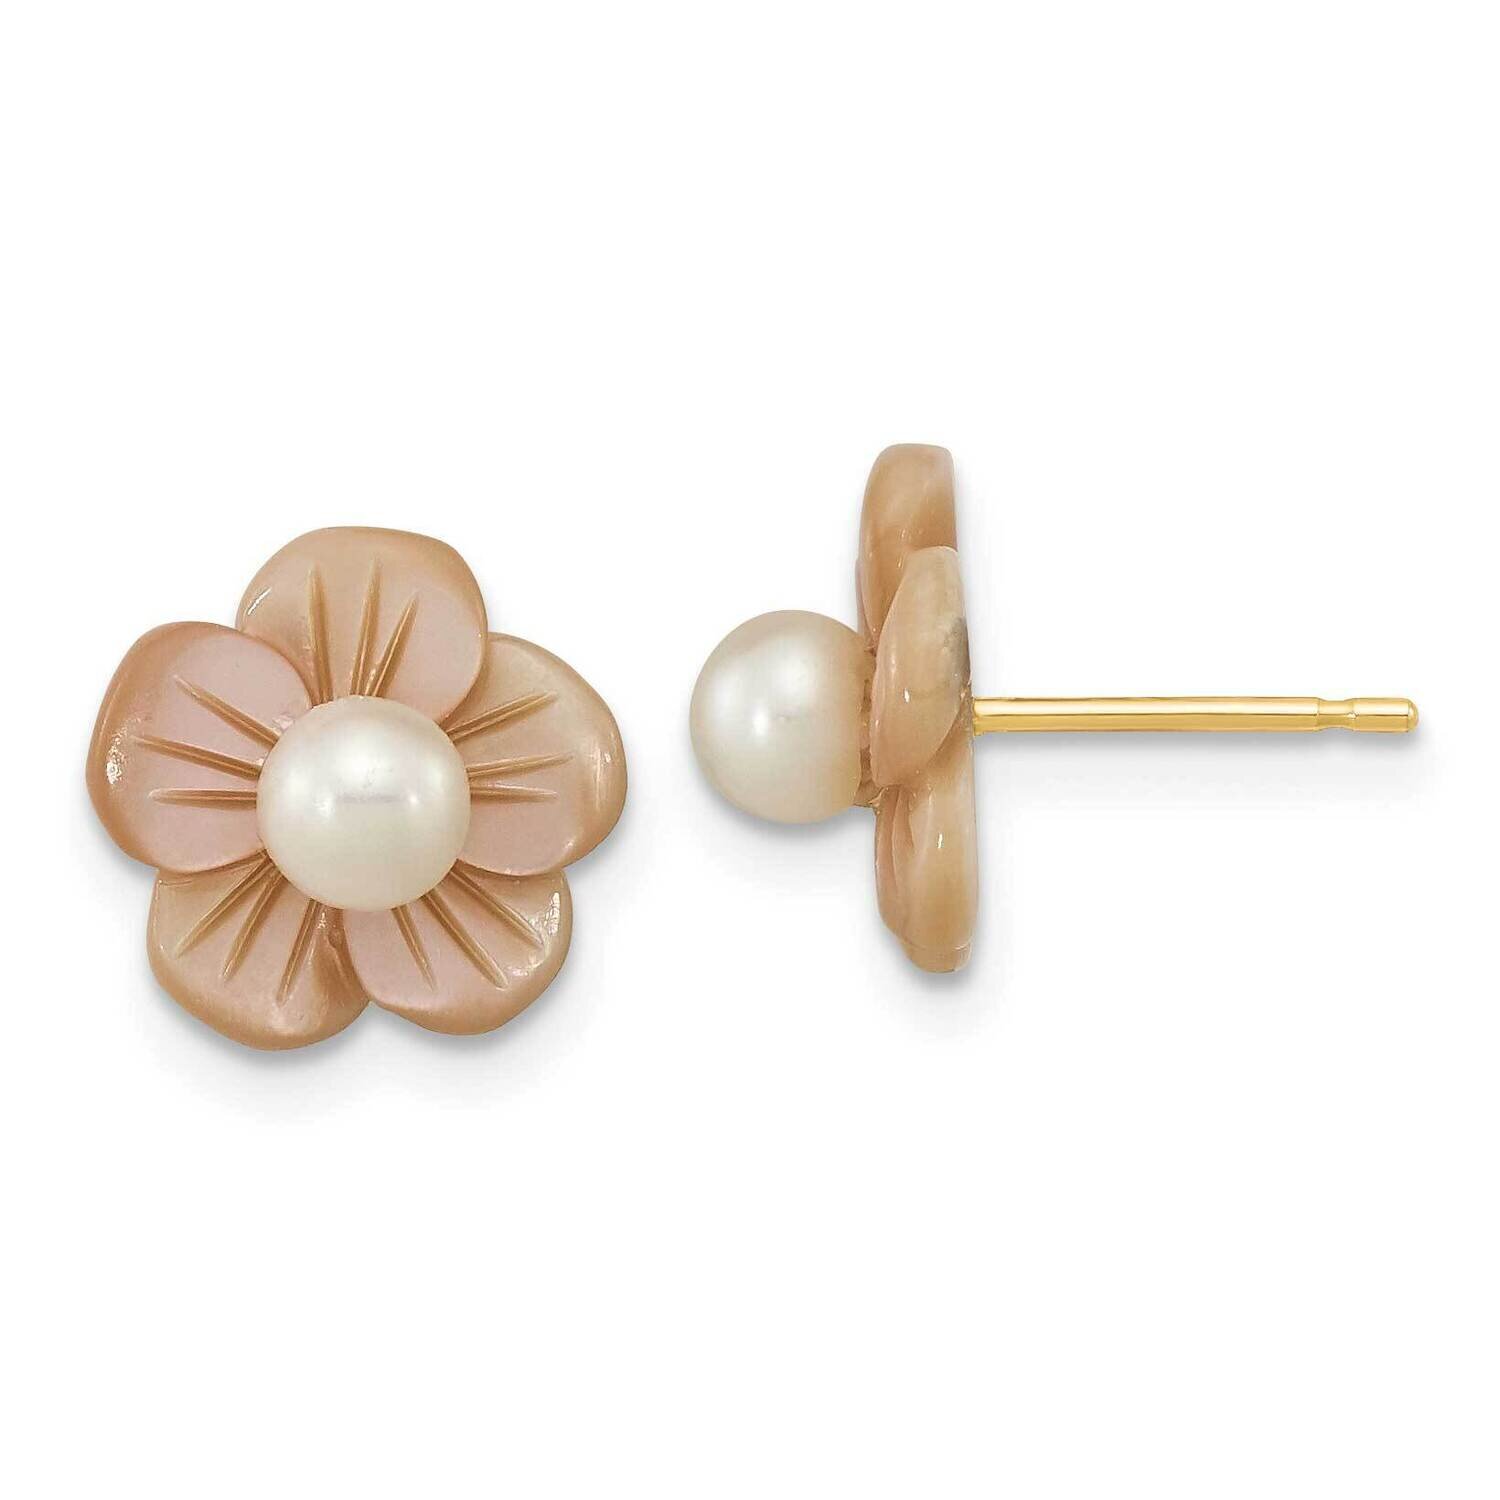 3-4mm Round White Cultured Freshwater Pearl Pink Mop Flower Earrings 14k Gold XF592EPWY